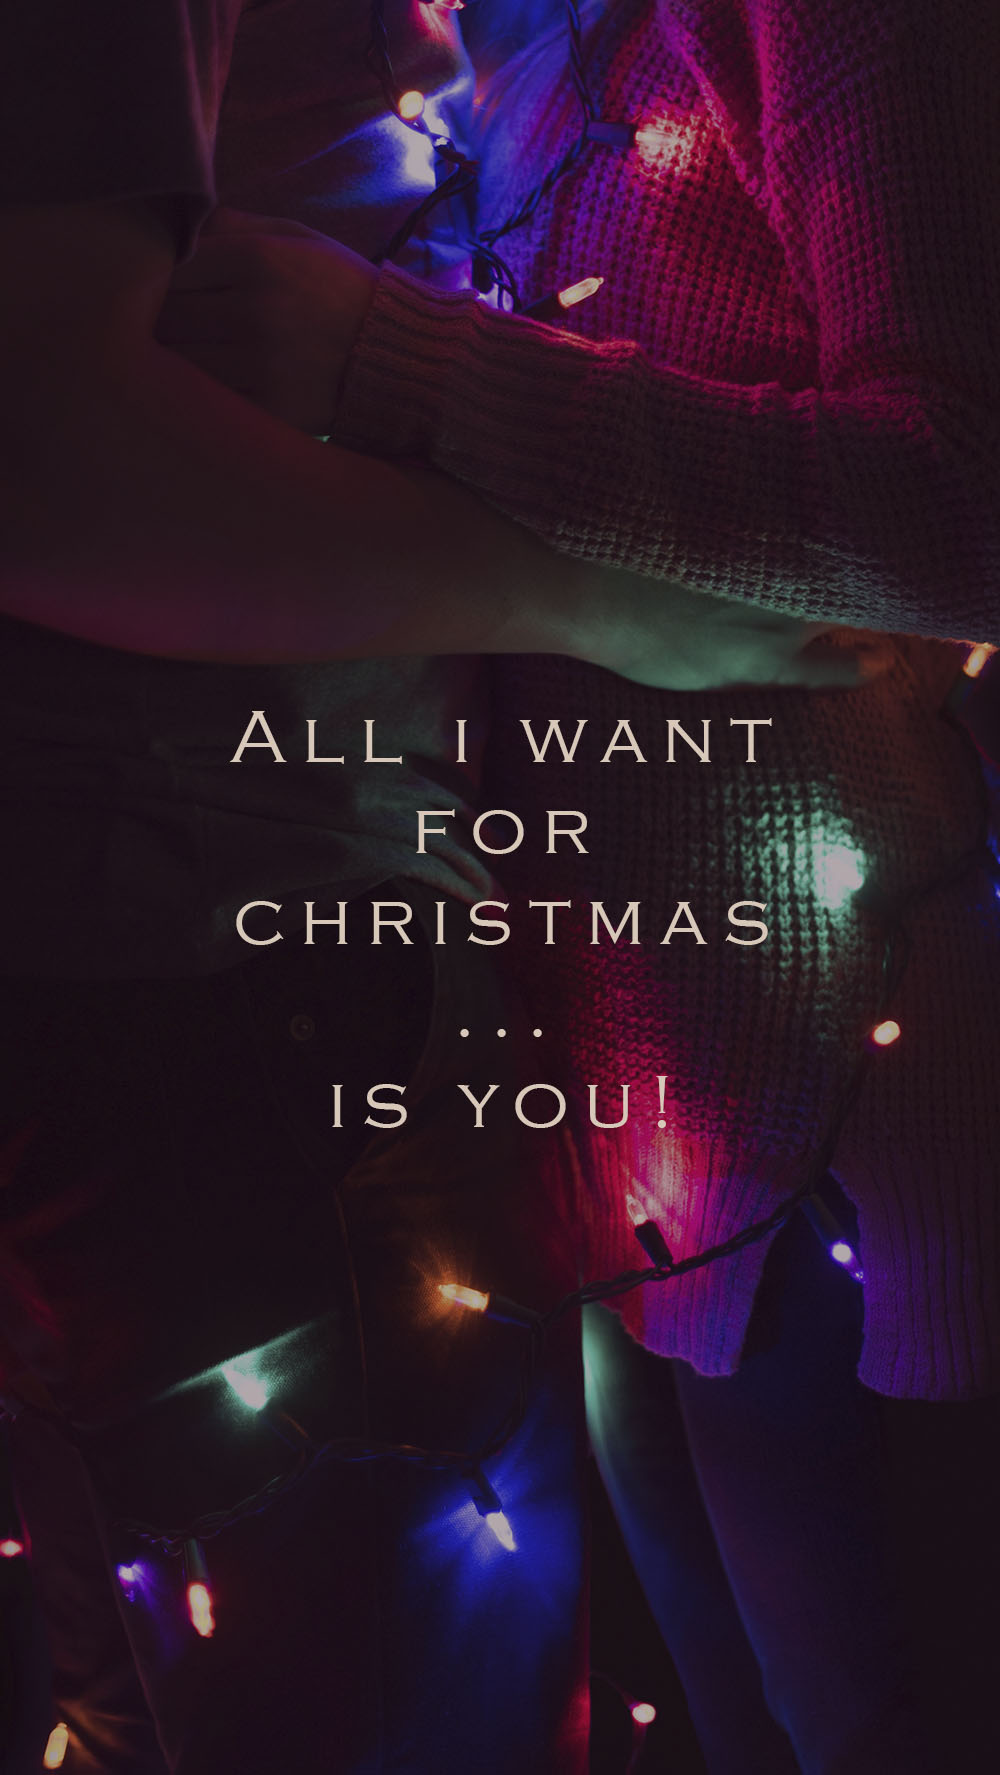 all i want for christmas is you love couple lights